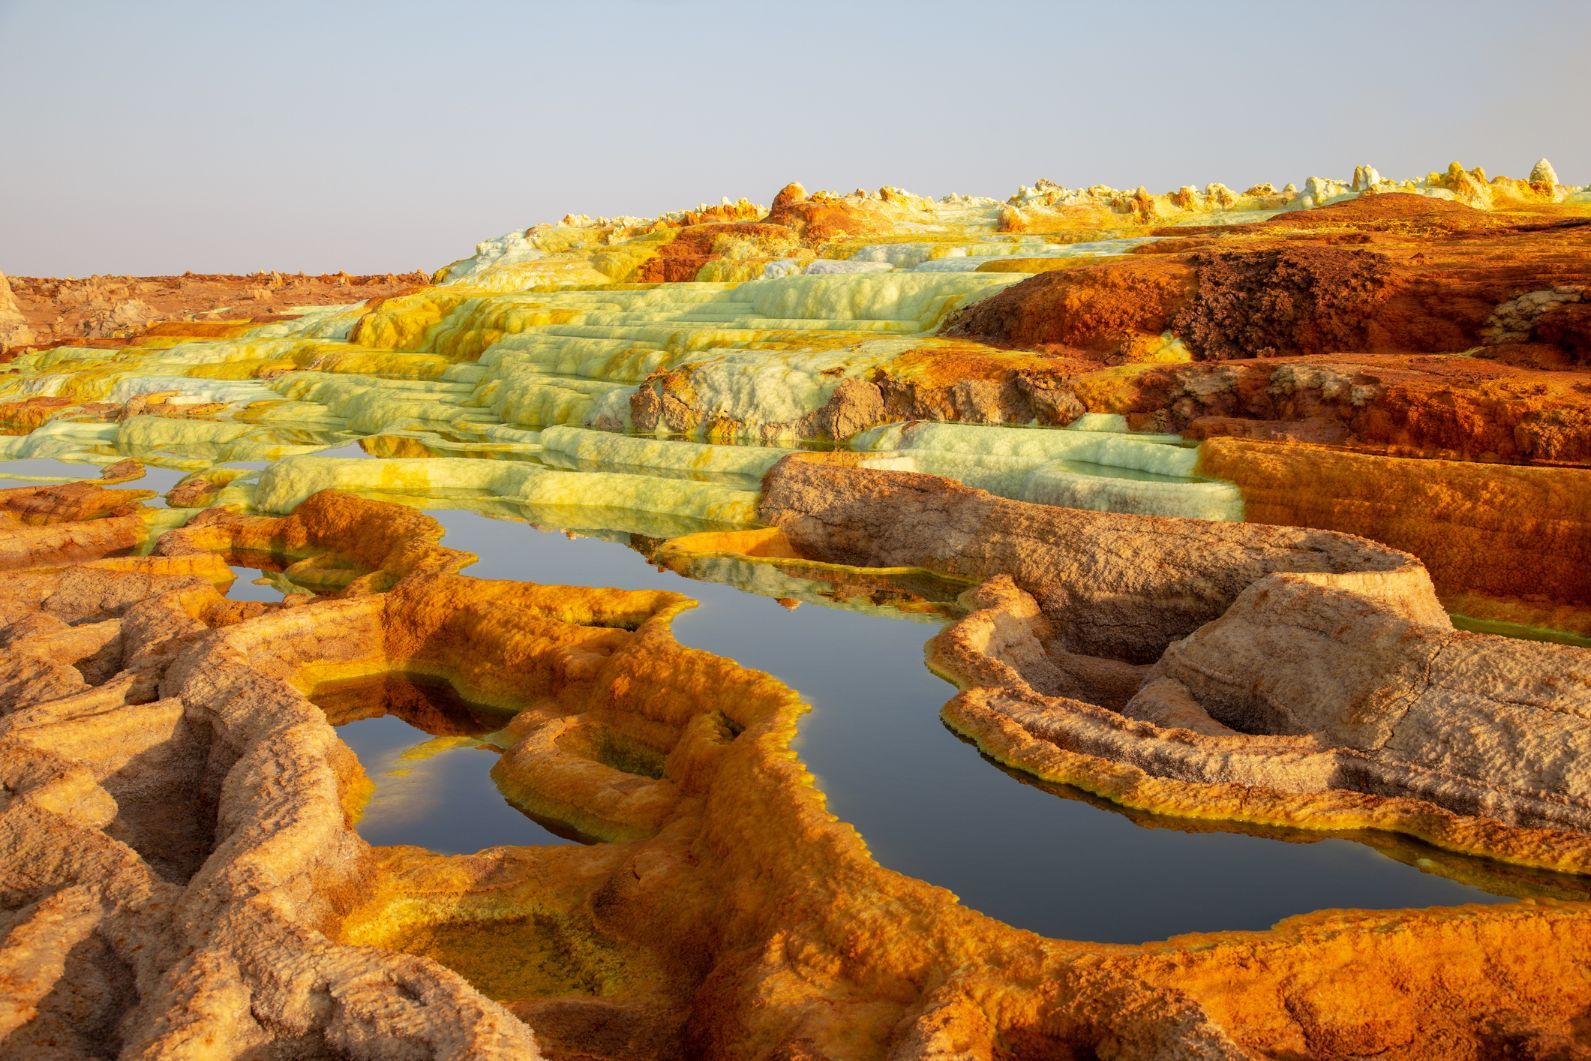 The remarkable Danakil Depression in Ethiopia